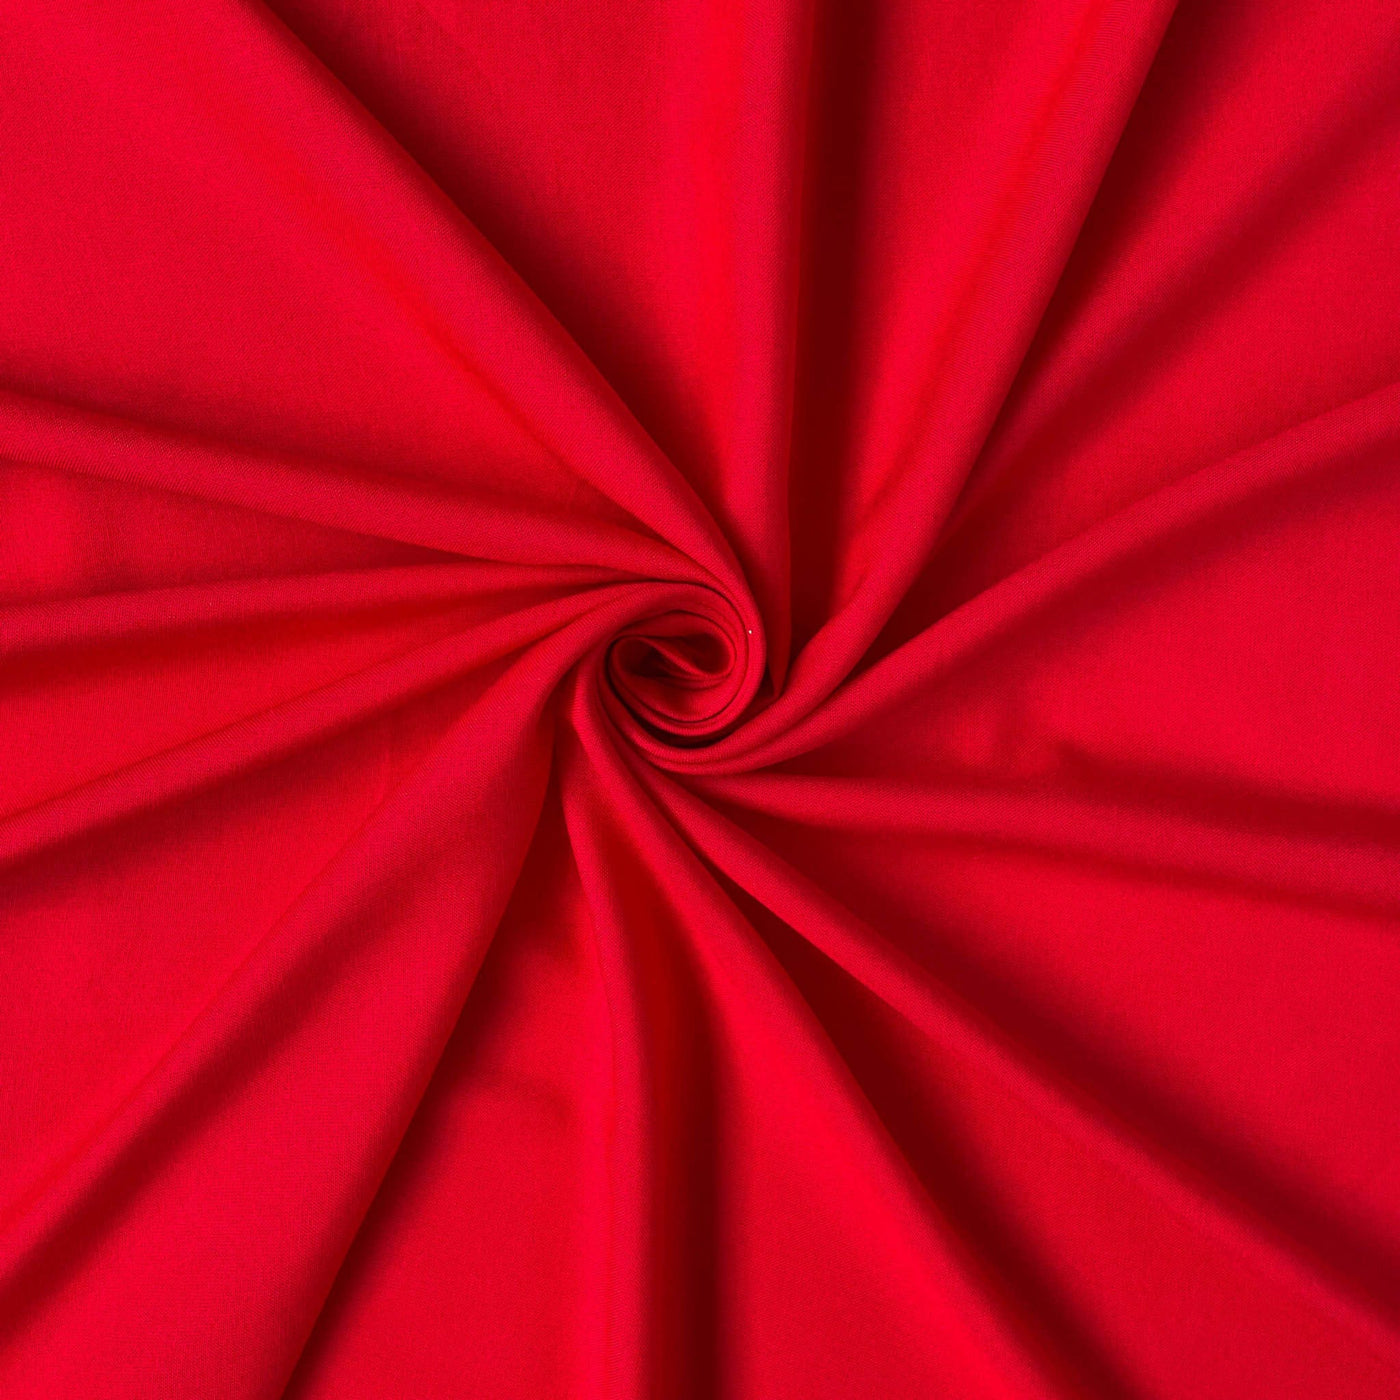 Fabric Pandit Fabric Scarlet Red Color Pure Rayon Fabric